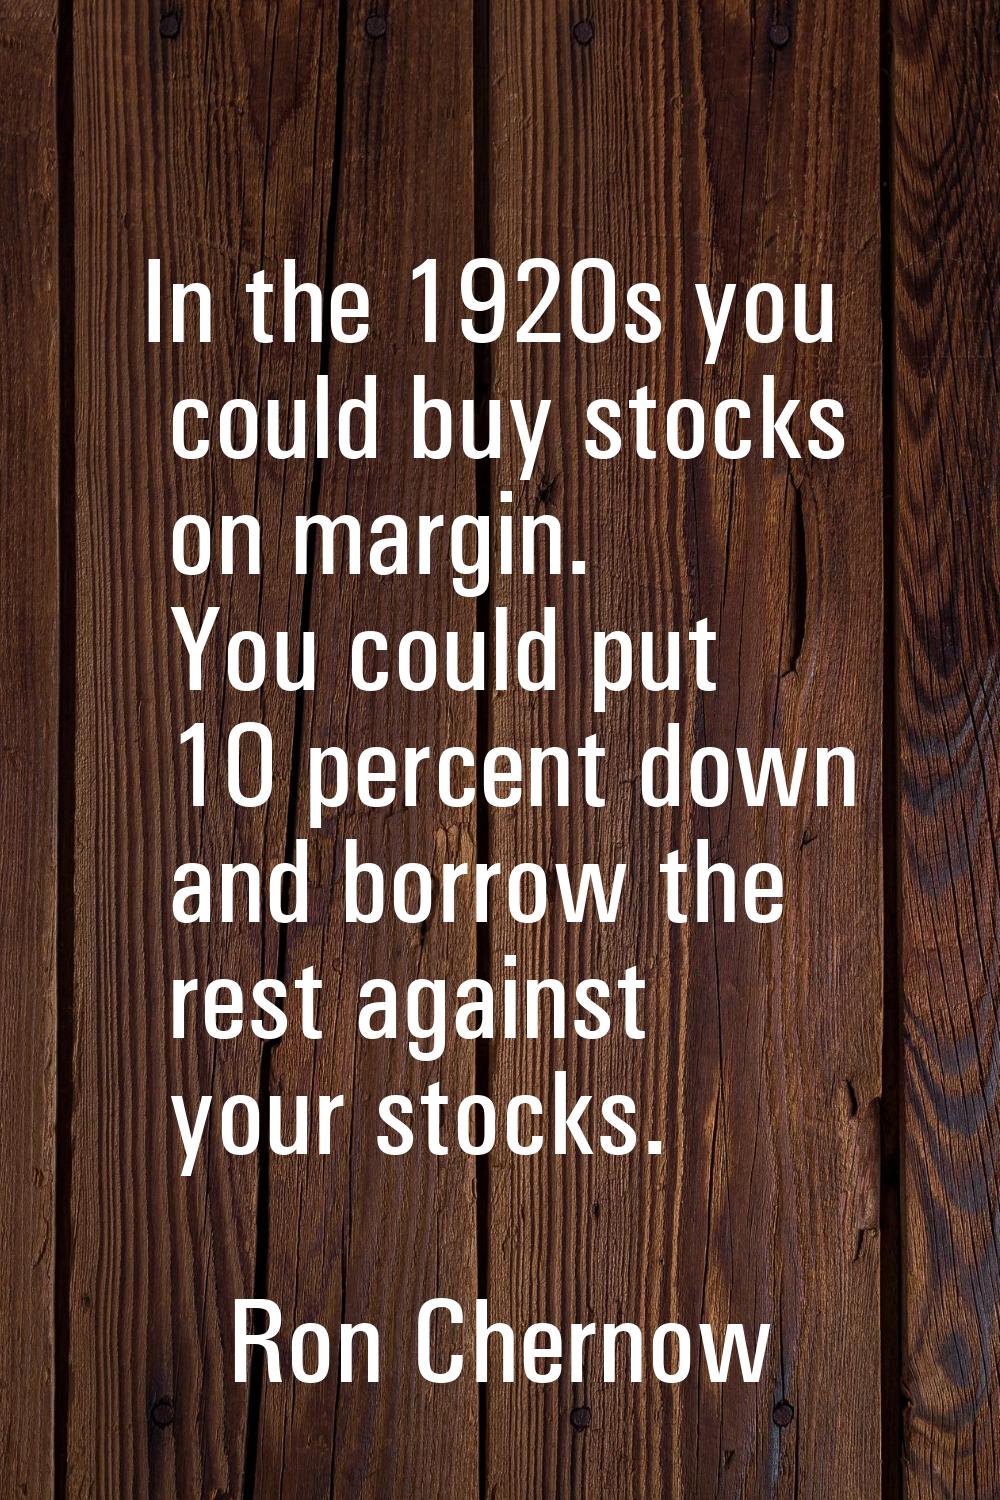 In the 1920s you could buy stocks on margin. You could put 10 percent down and borrow the rest agai